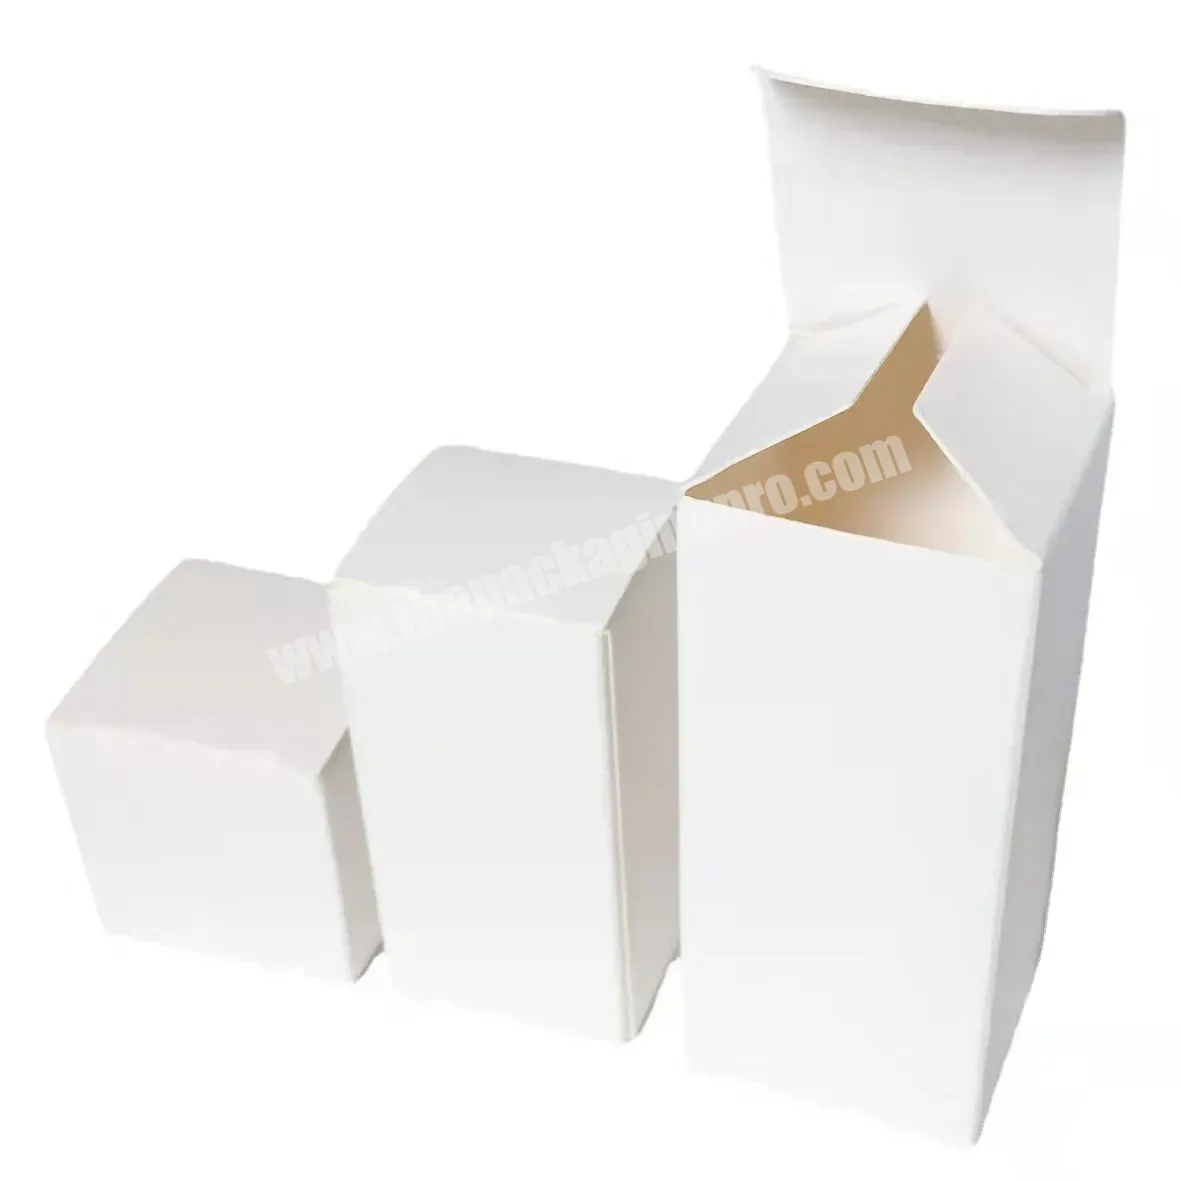 Packing Box Boxes Manufactures Made Custom Cookie Cake Candy Fast Food Packaging Paper Rigid Boxes Paperboard Recyclable Accept - Buy Paper Cake Box,Paper Box For Food,Paper Box For Cake.